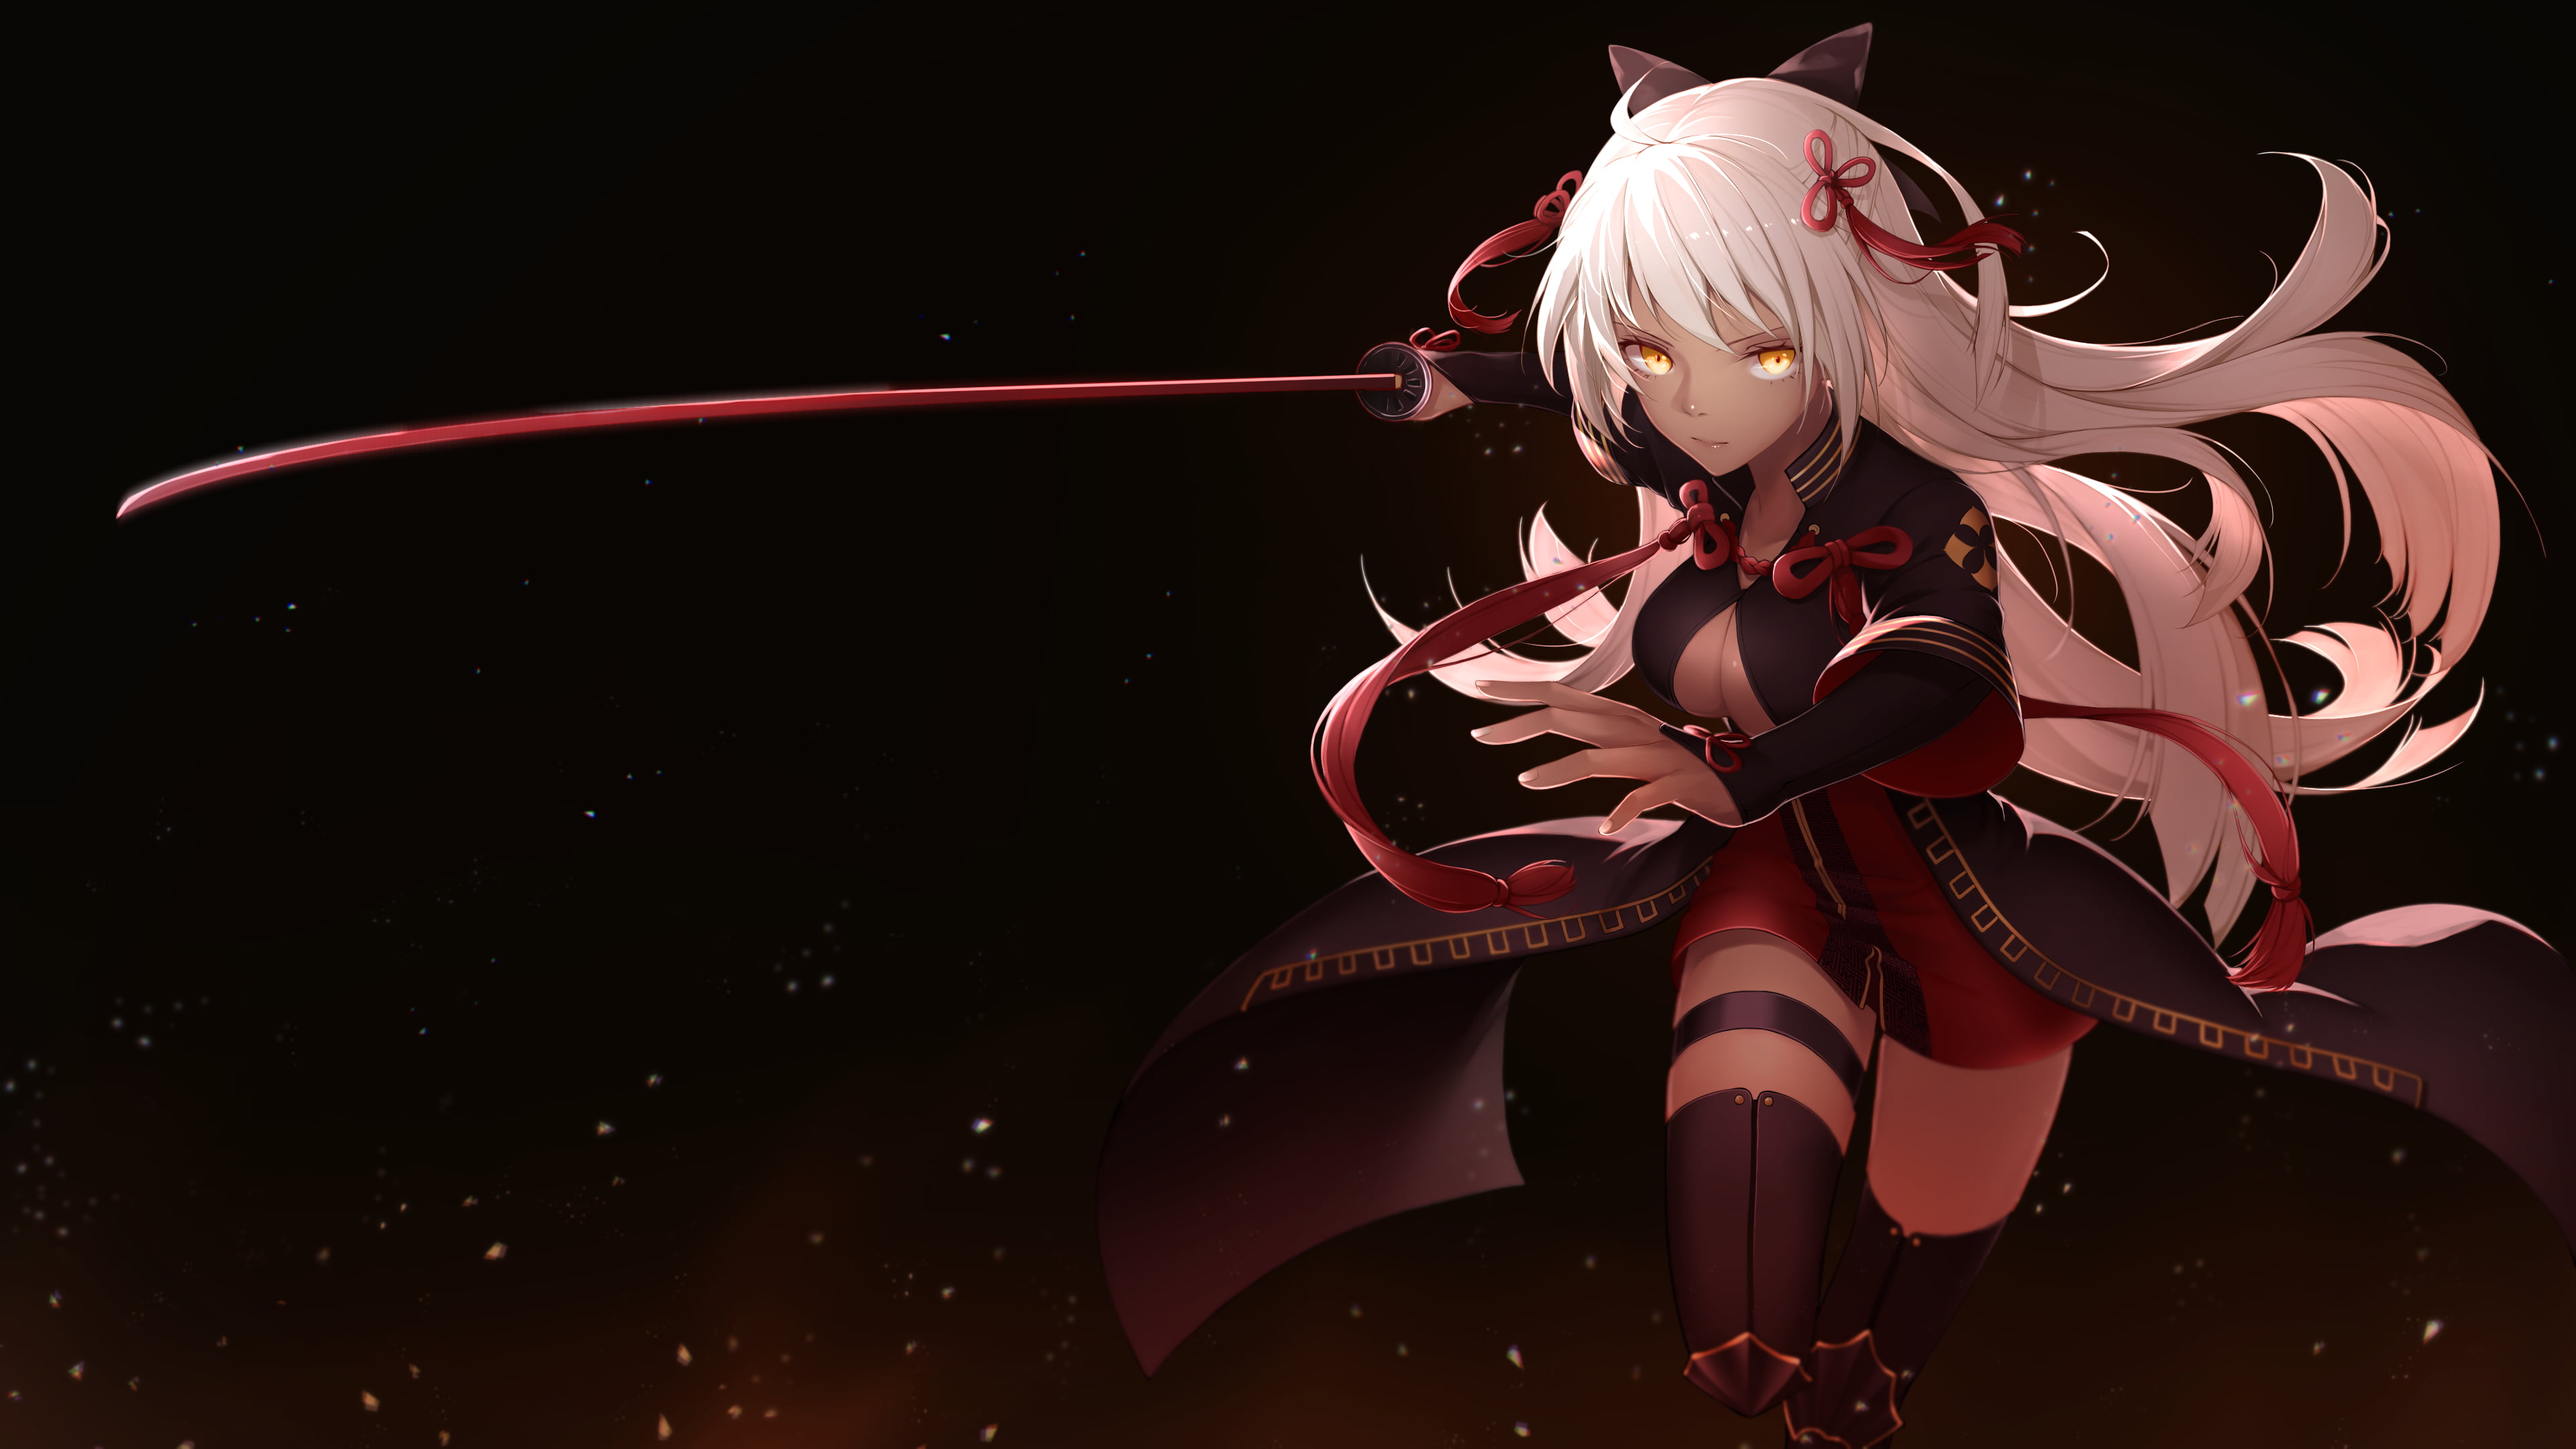 White haired female anime character with sword illustration, Fate ...